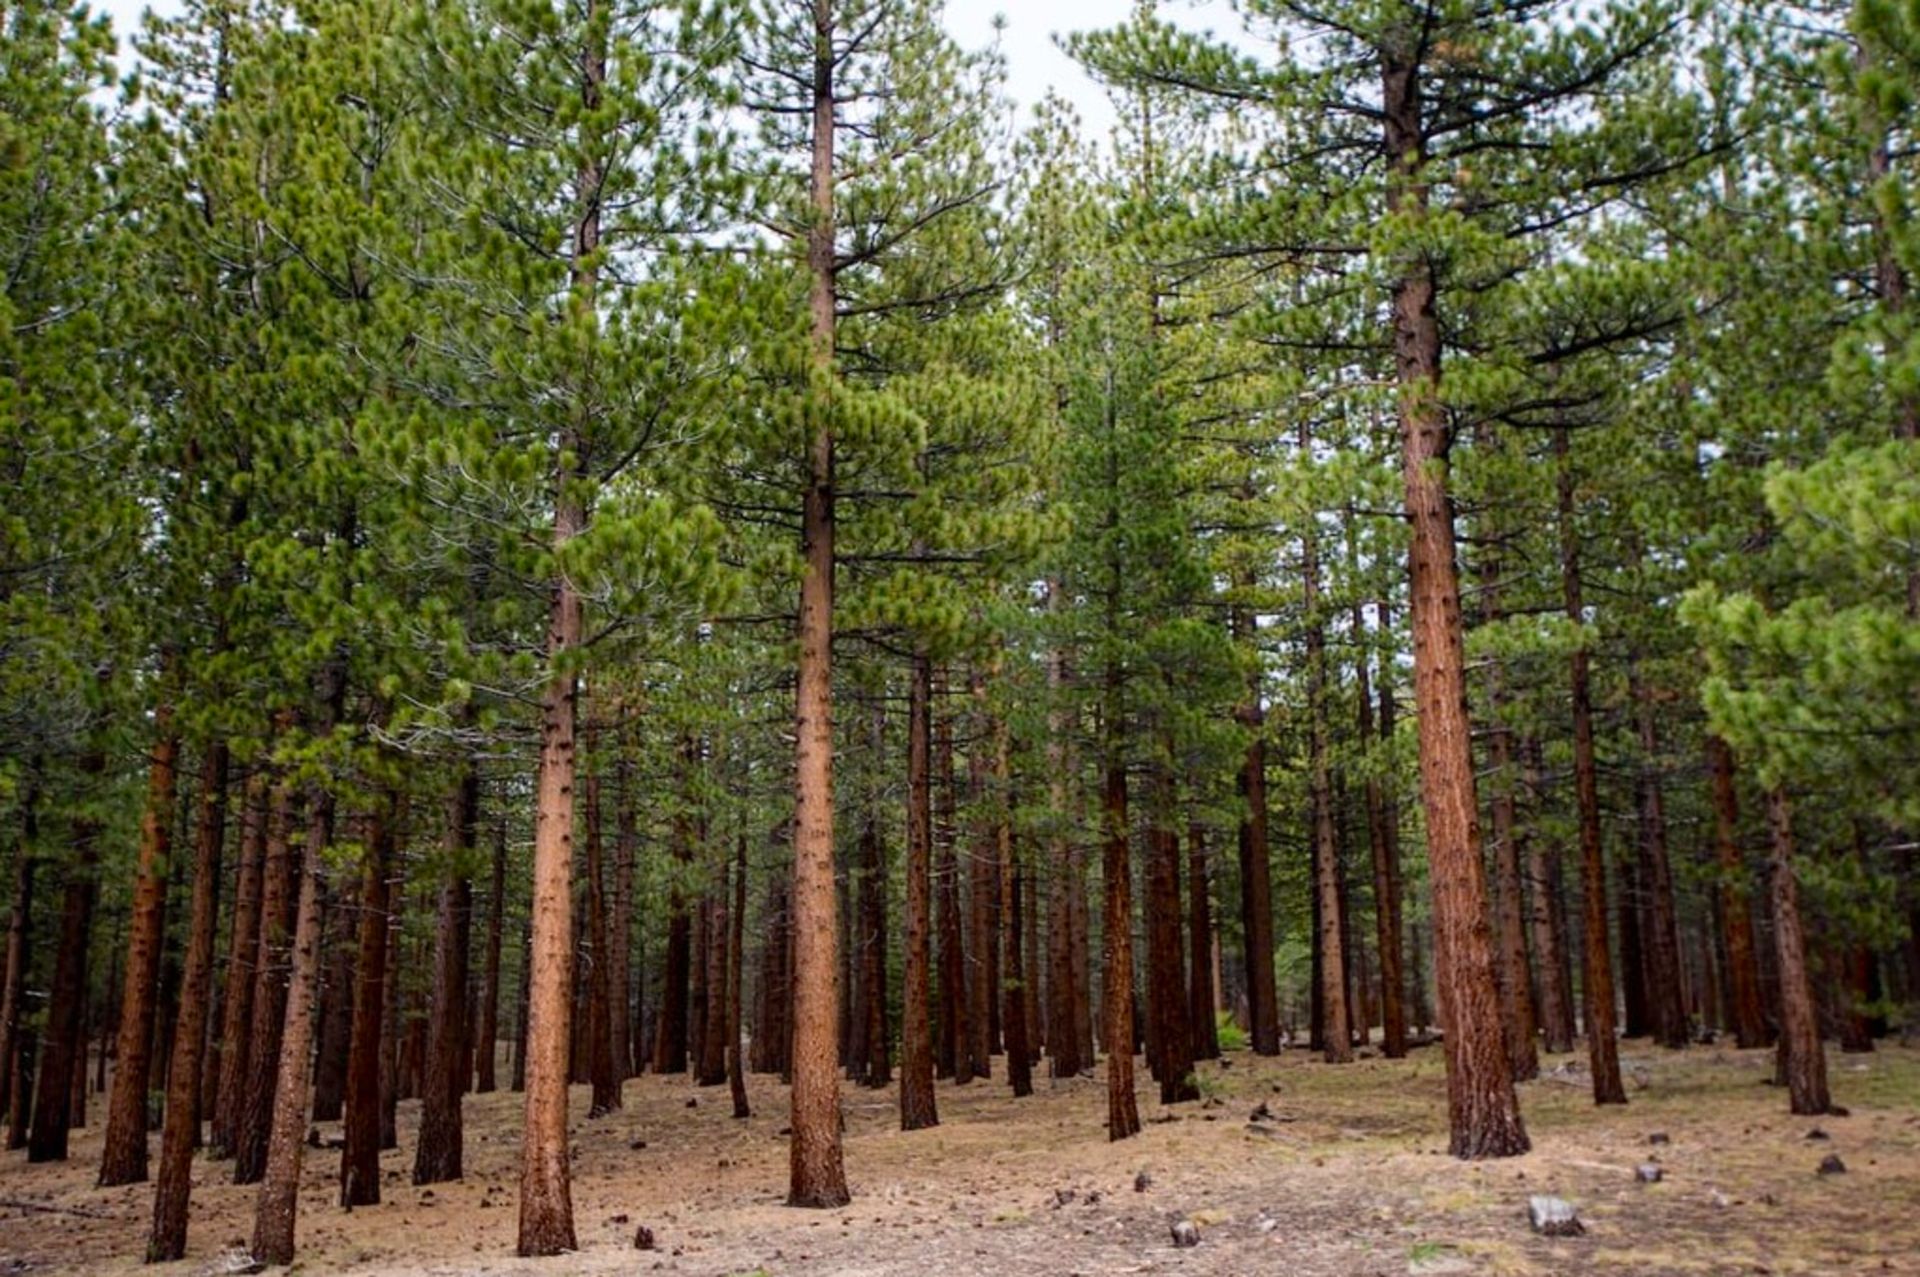 Over an Acre of Pine Forest in California Pines, Modoc County, California! - Image 4 of 10